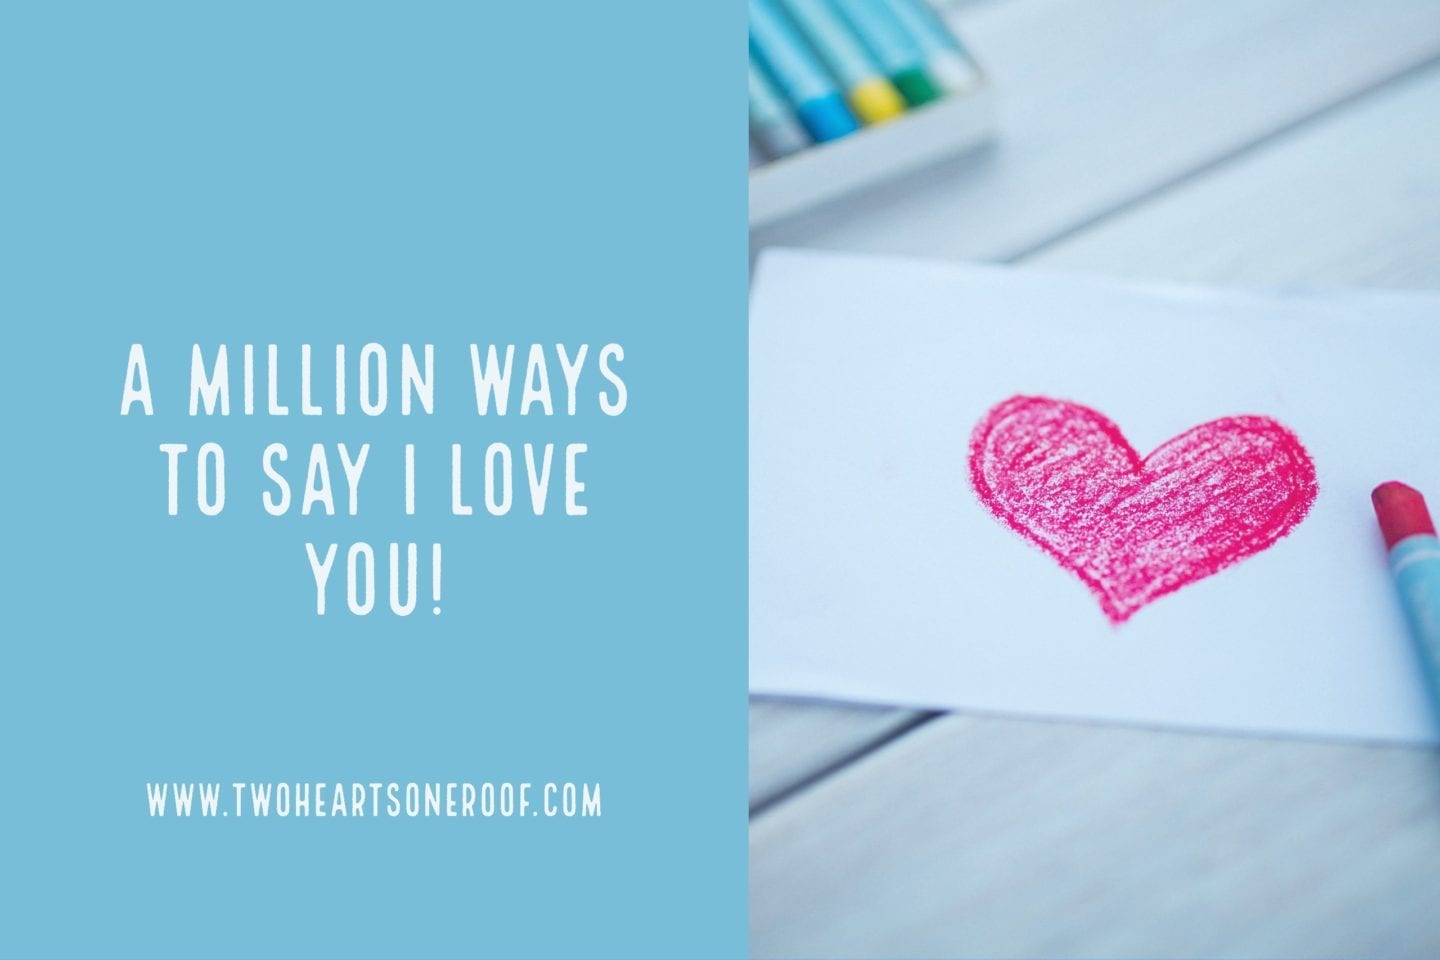 A Million Ways to Say I Love You!